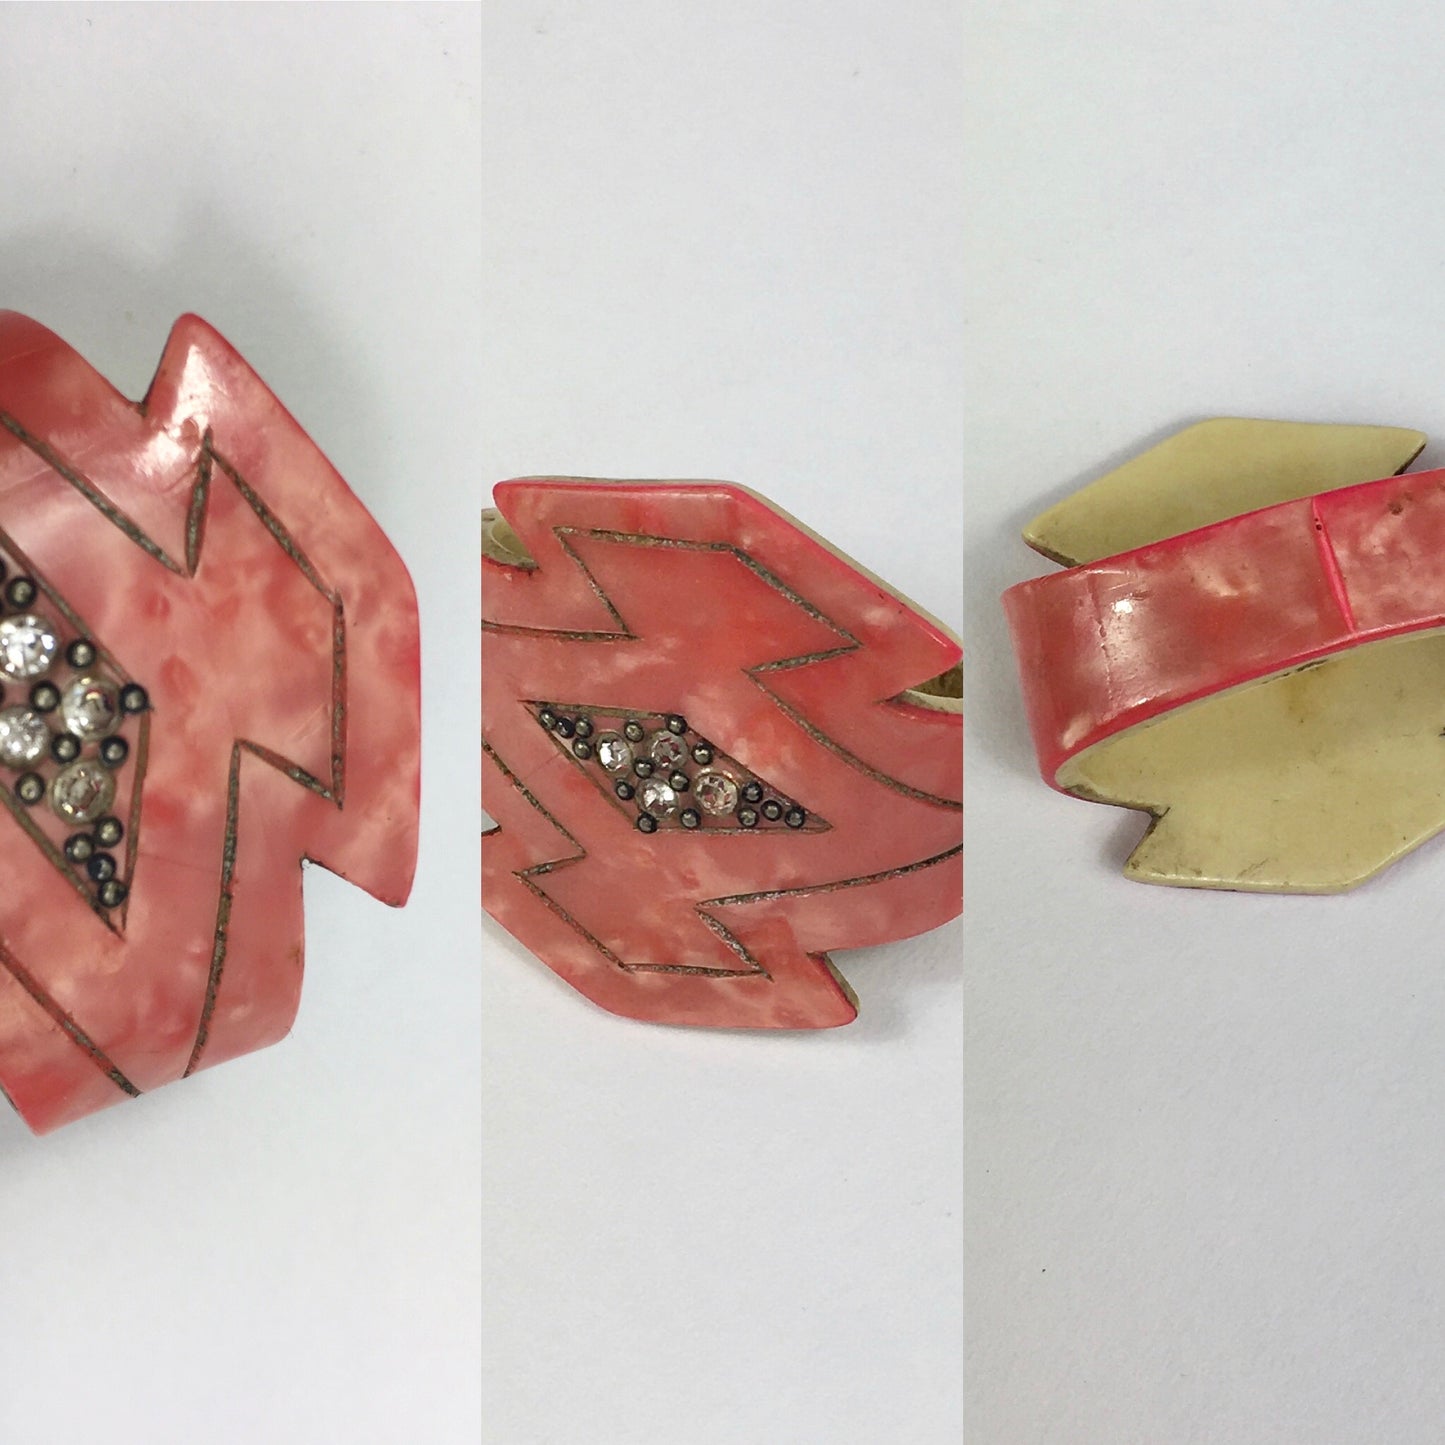 Original 1930’s Art Deco Celluloid Scarf Ring - In A Beautiful Coral Colouring With Paste Detailing